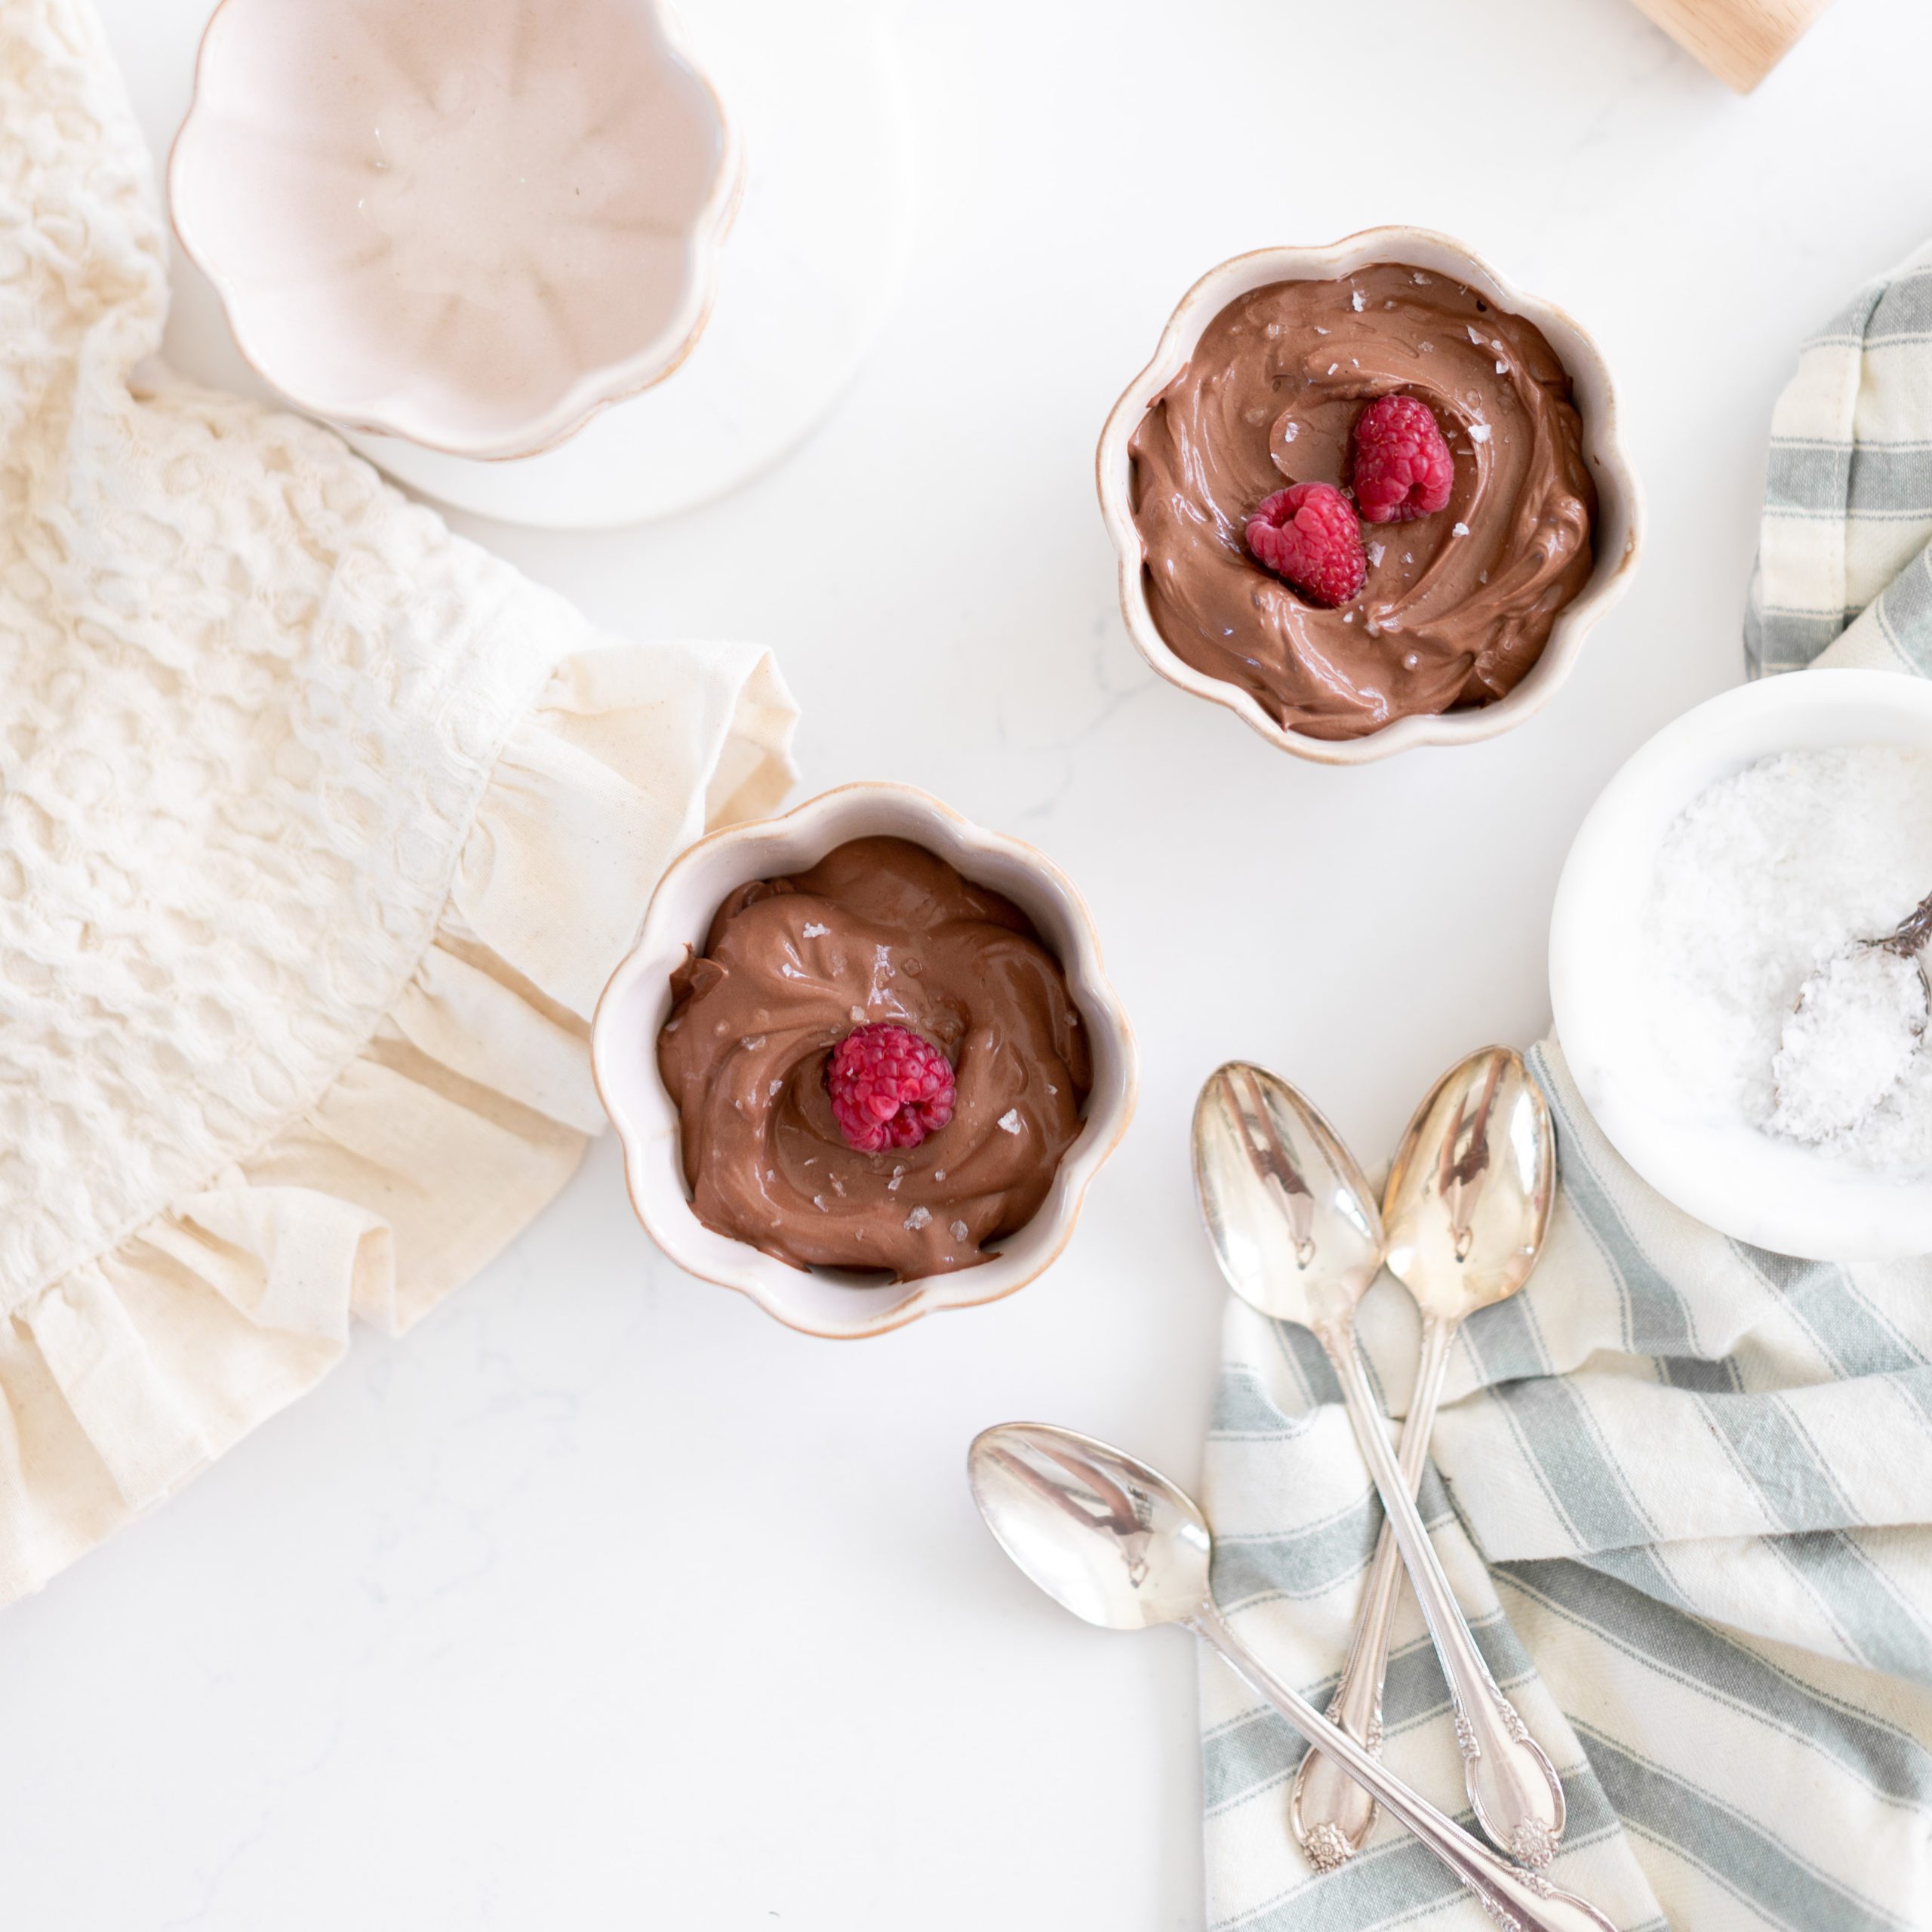 Indulging Cravings: Is It Safe to Enjoy Chocolate Mousse During Pregnancy?  — Ok Hera